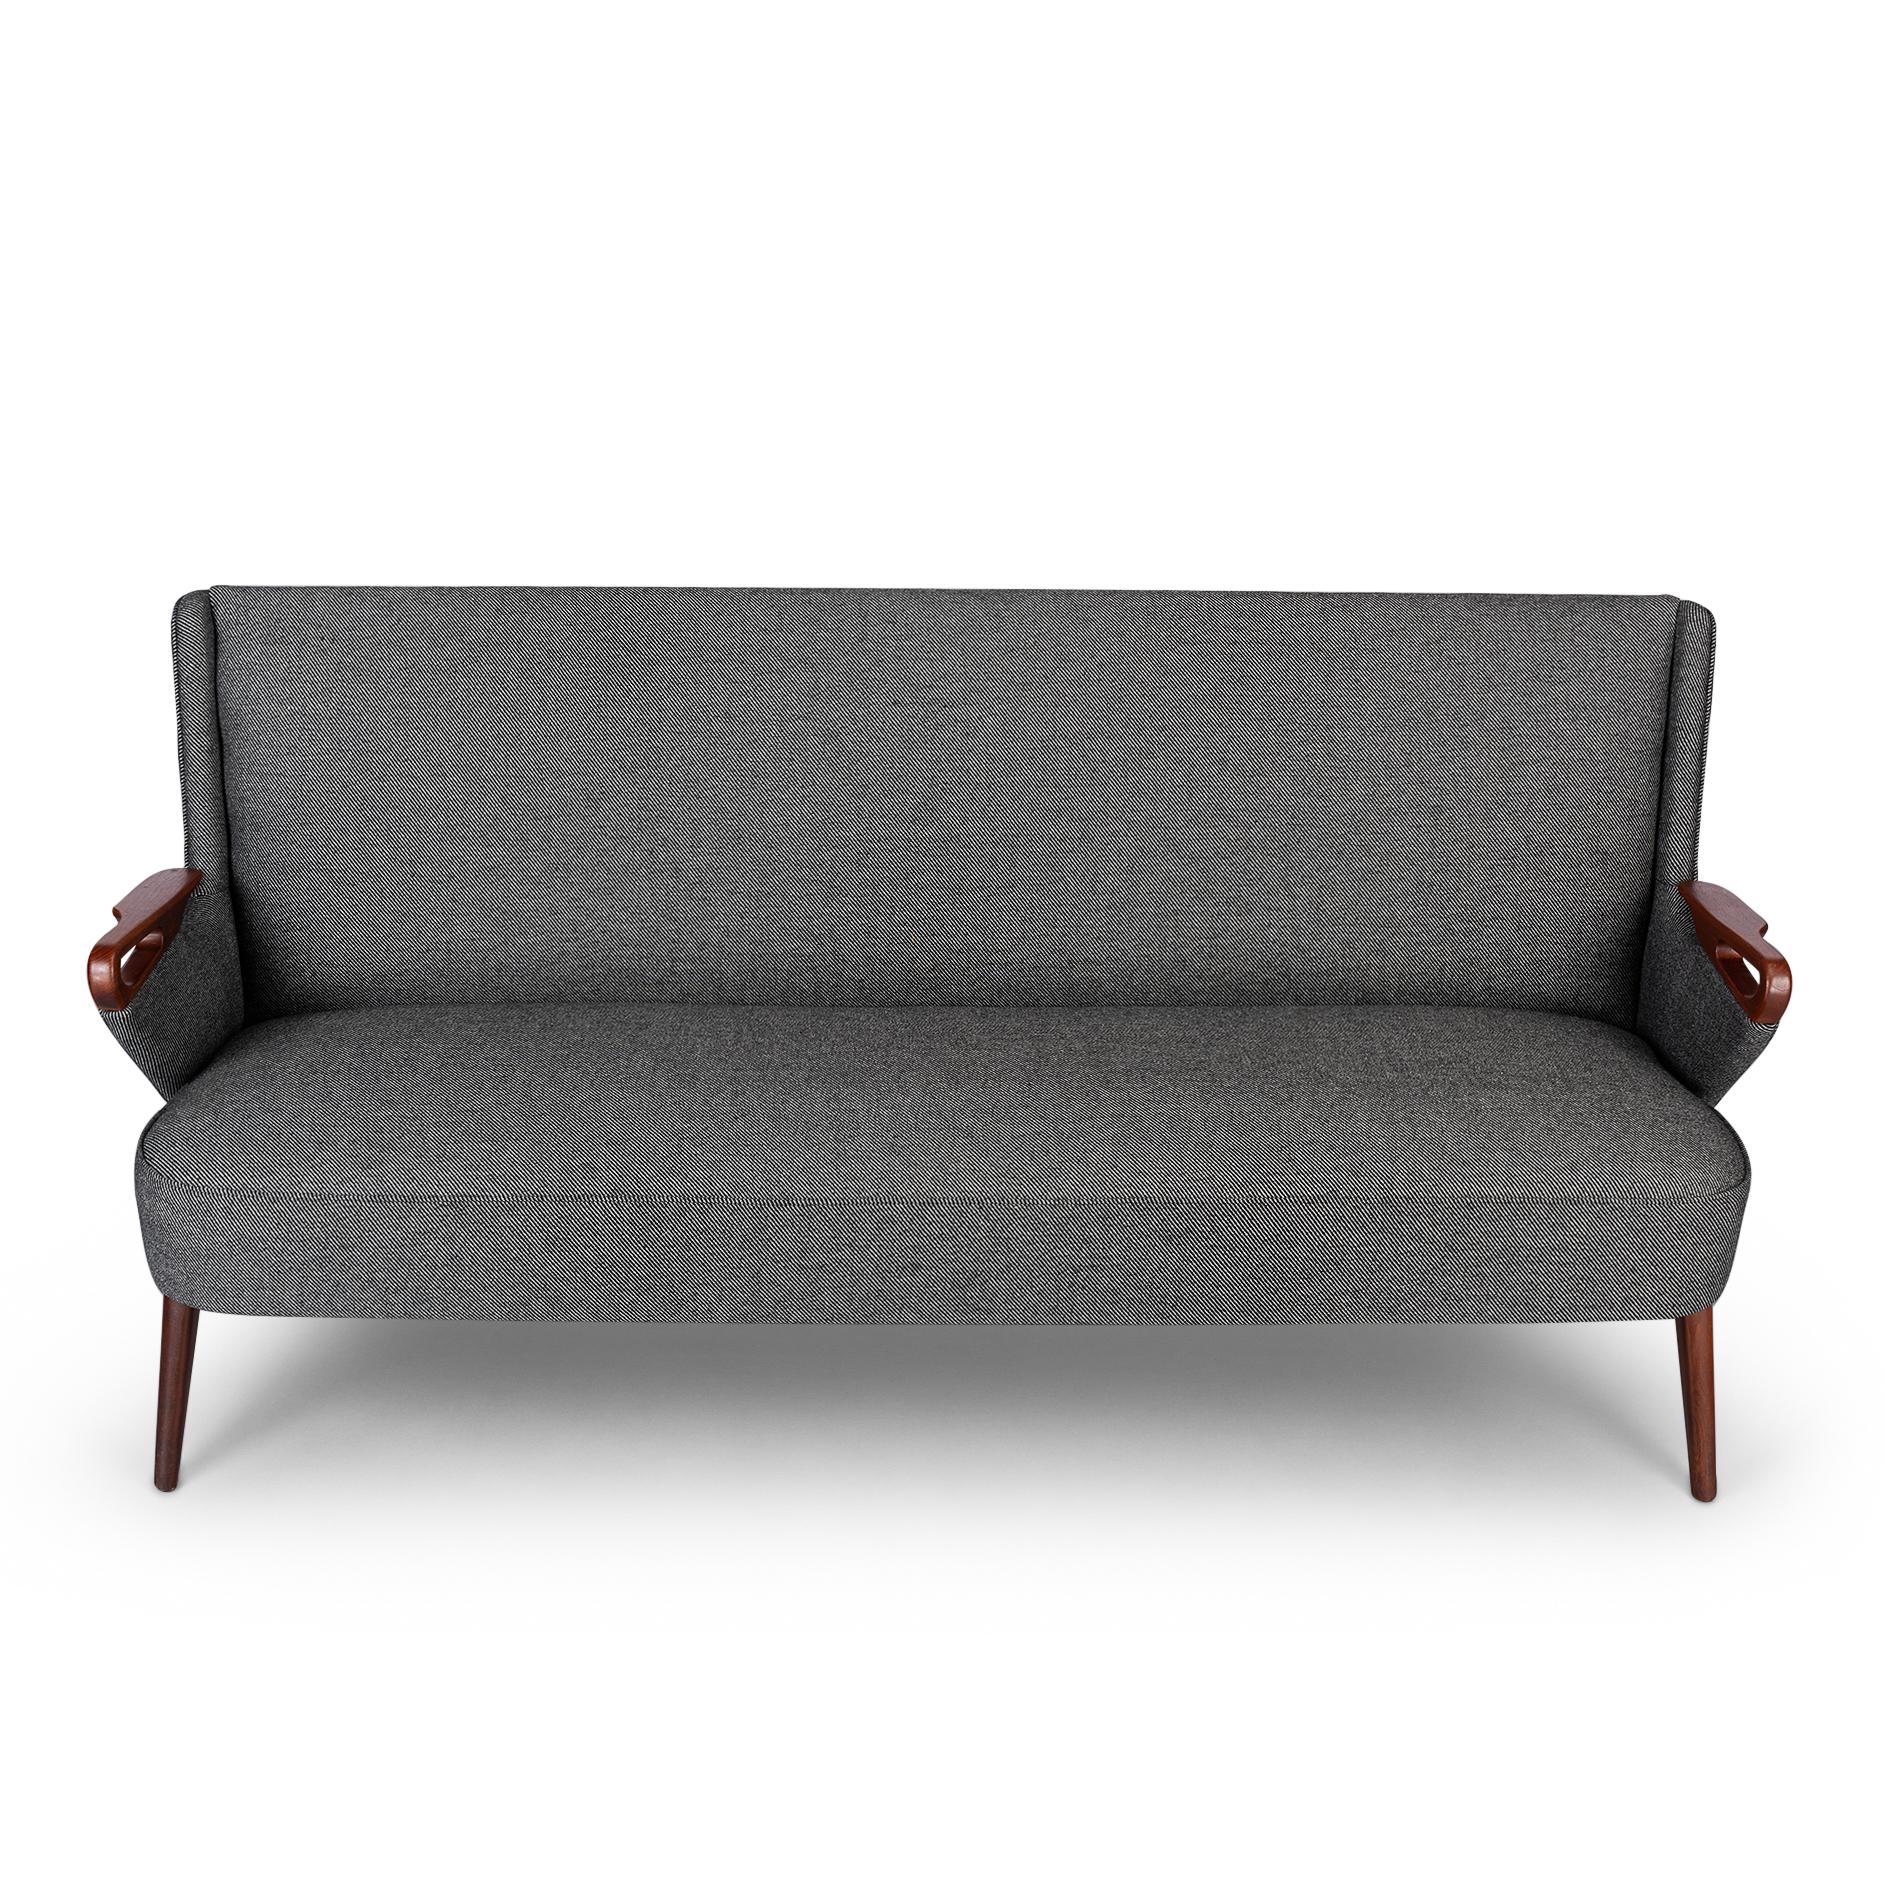 Reupholstered Dark Grey 2.5 Seat Sofa No. Cfb52 by C. Findahl Brodersen, 1950s For Sale 2